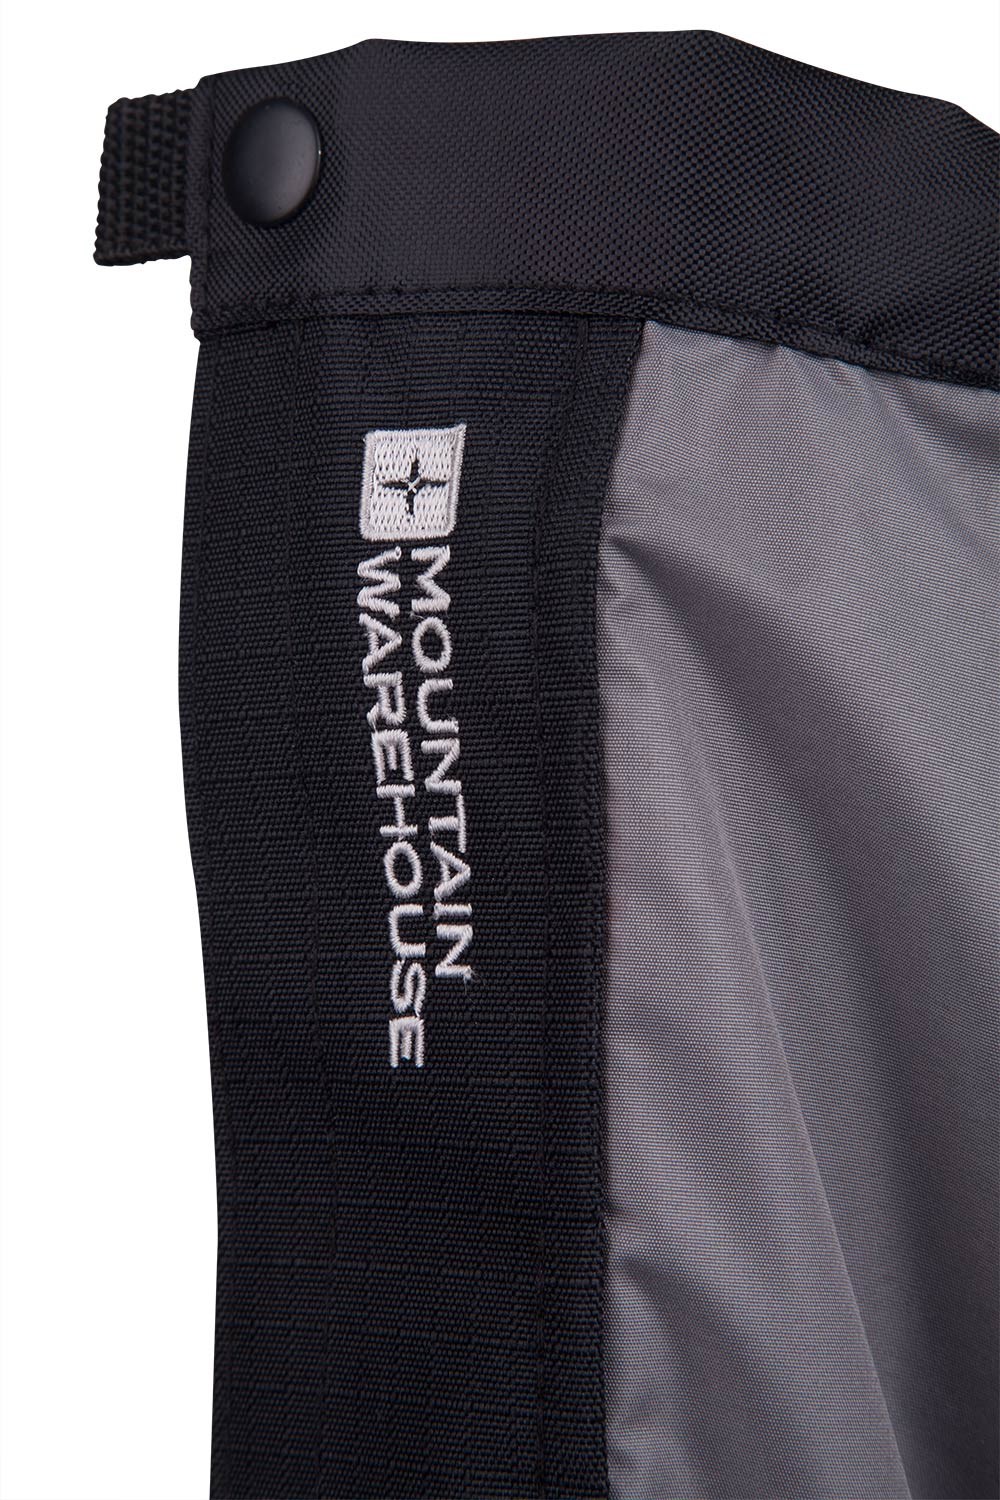 Mountain Warehouse Gaiters Waterproof and Breathable with Secure Front Closure 